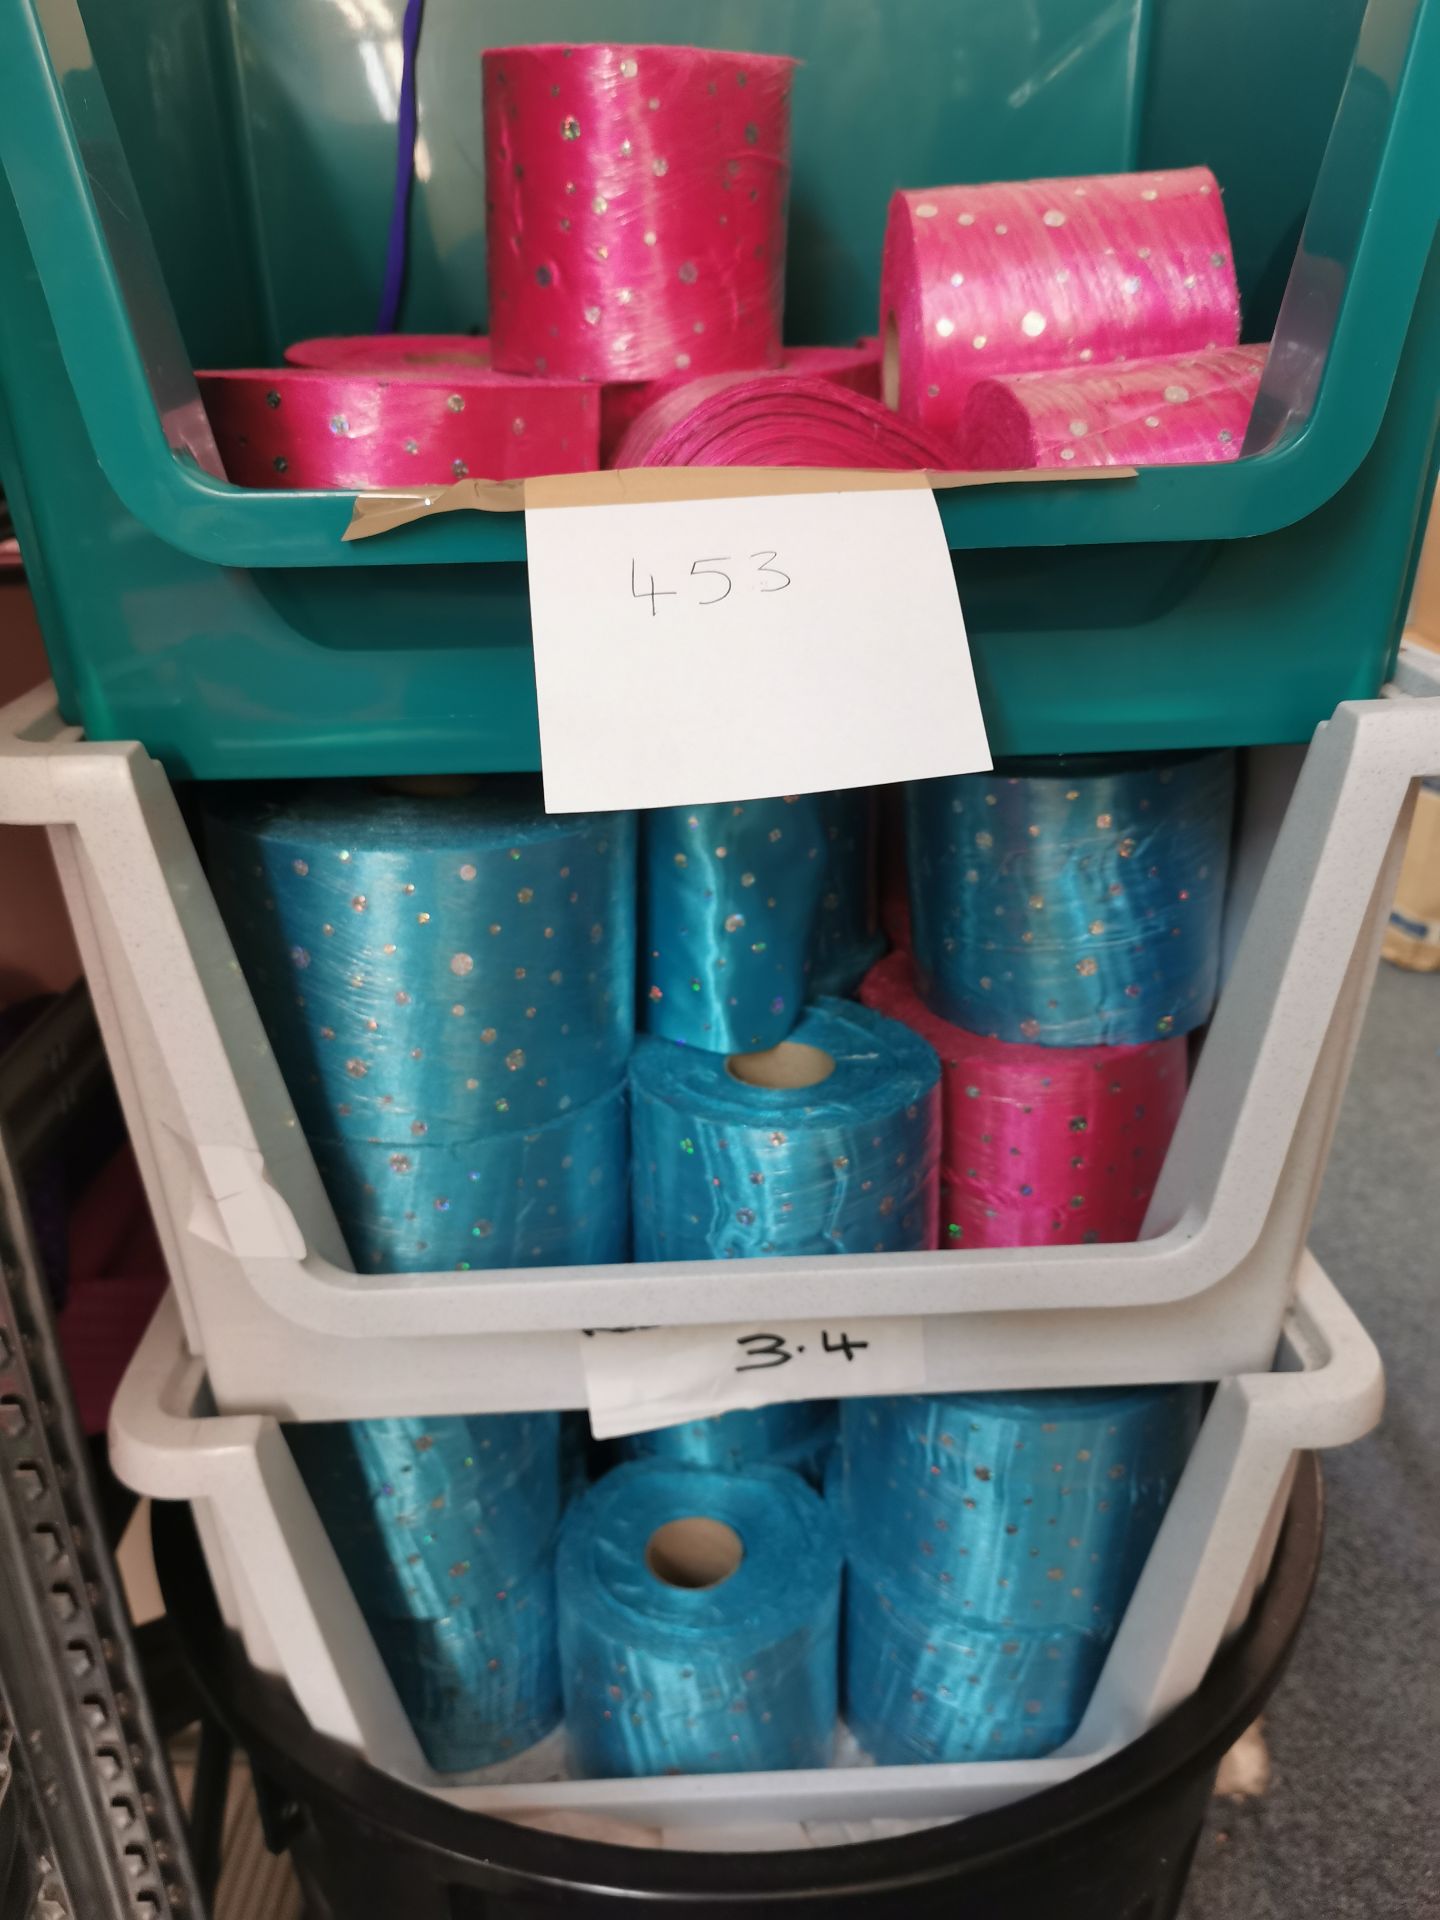 33x Sequin fabric rolls in pink and blue - Image 4 of 4